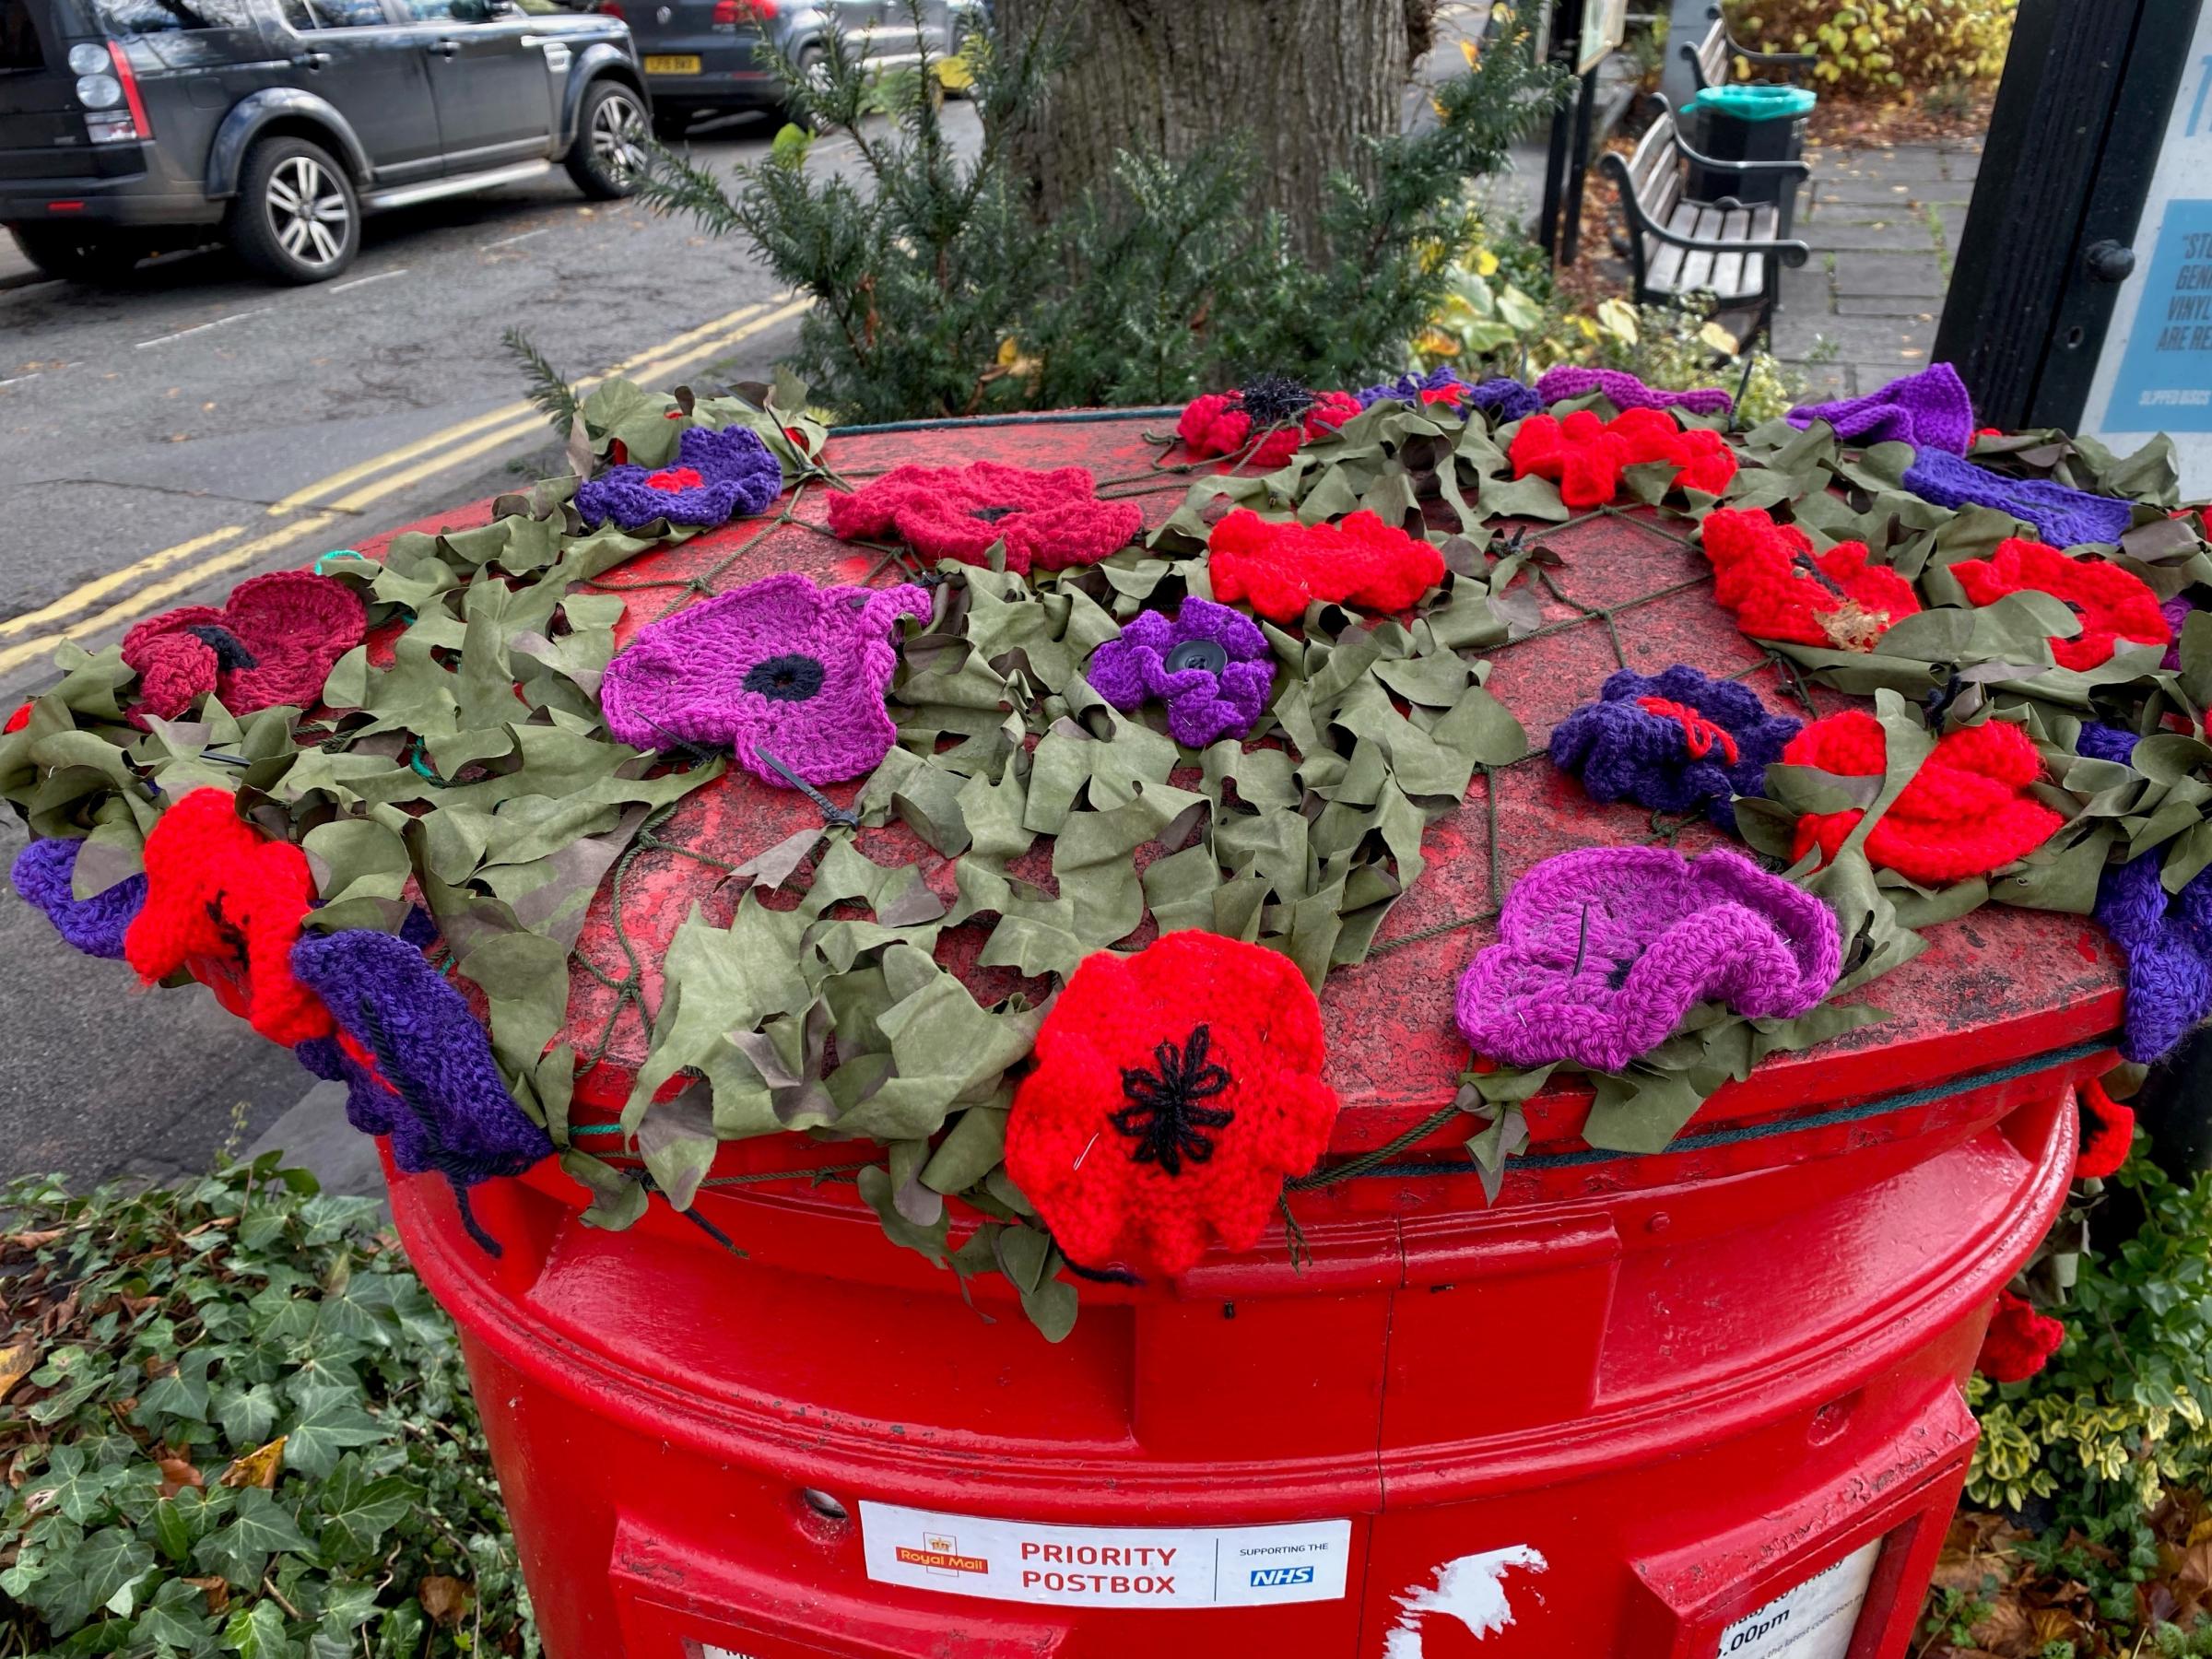 Some poppies have been placed on top of a postbox